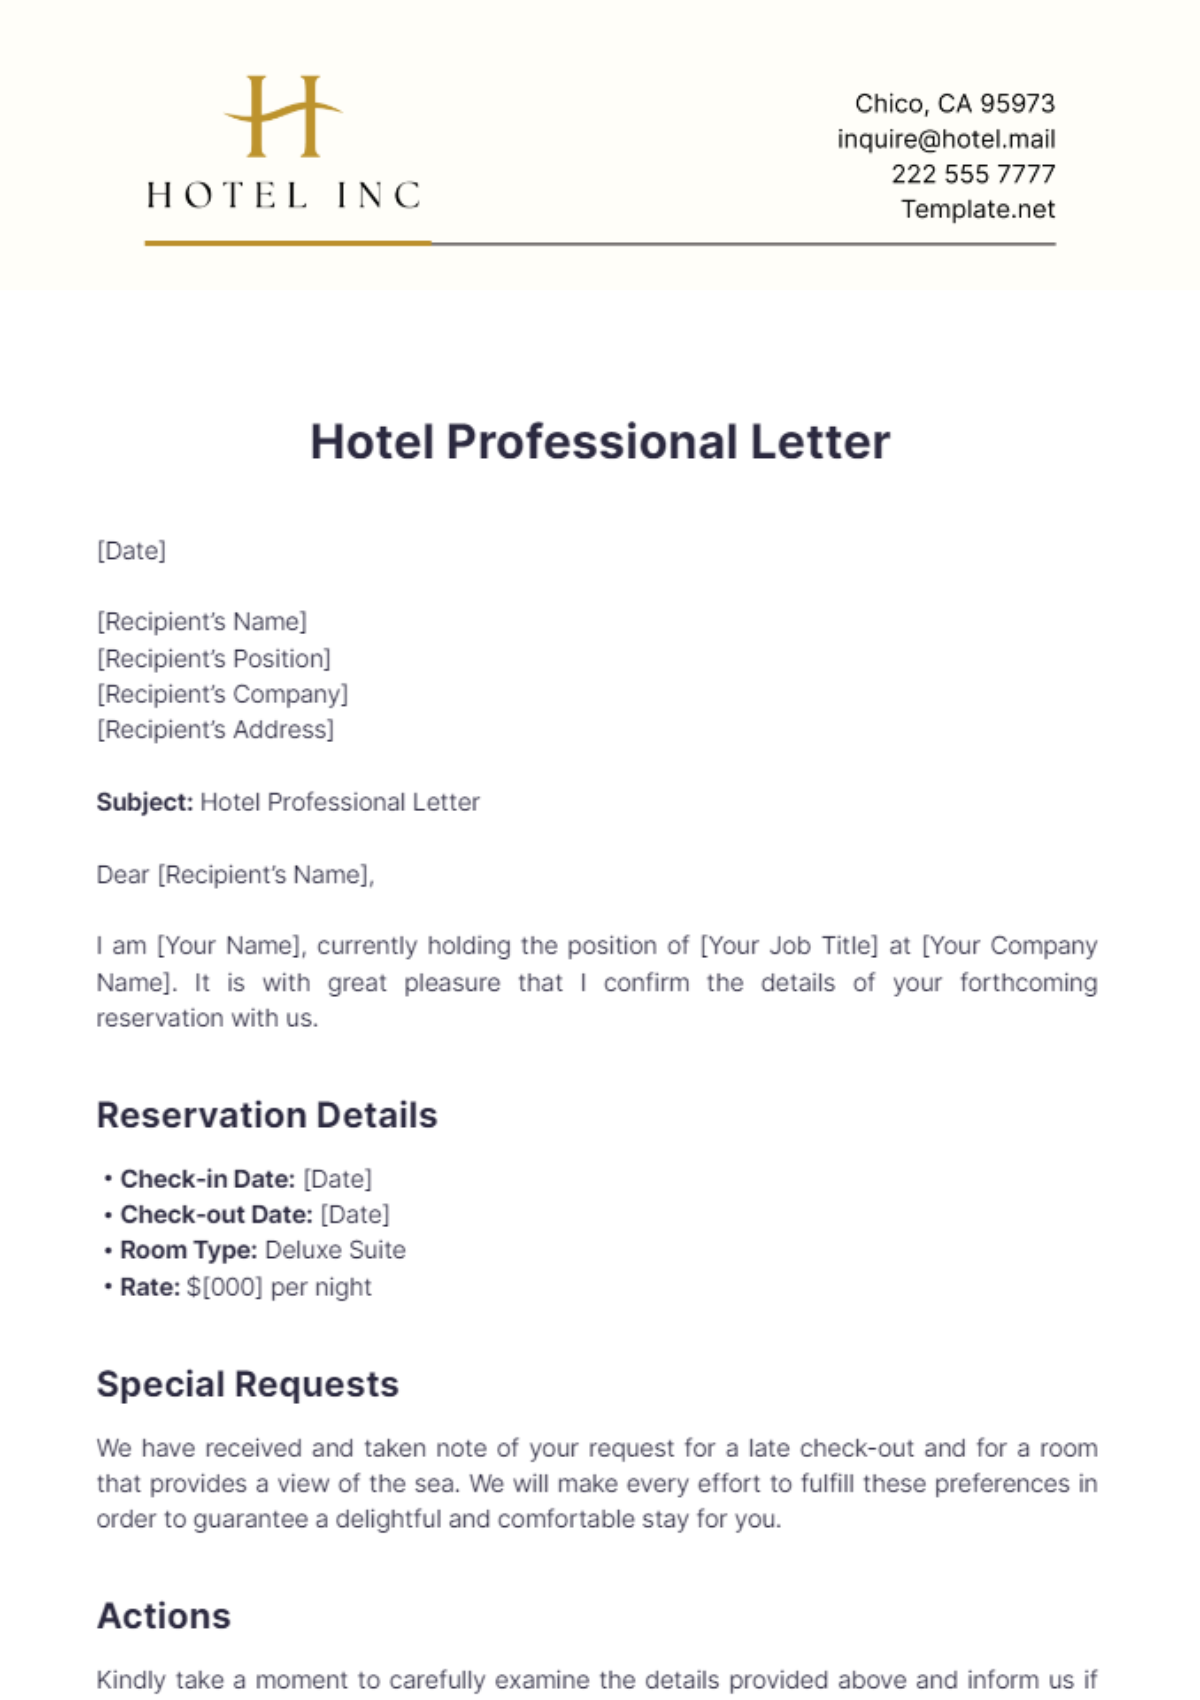 Hotel Professional Letter Template